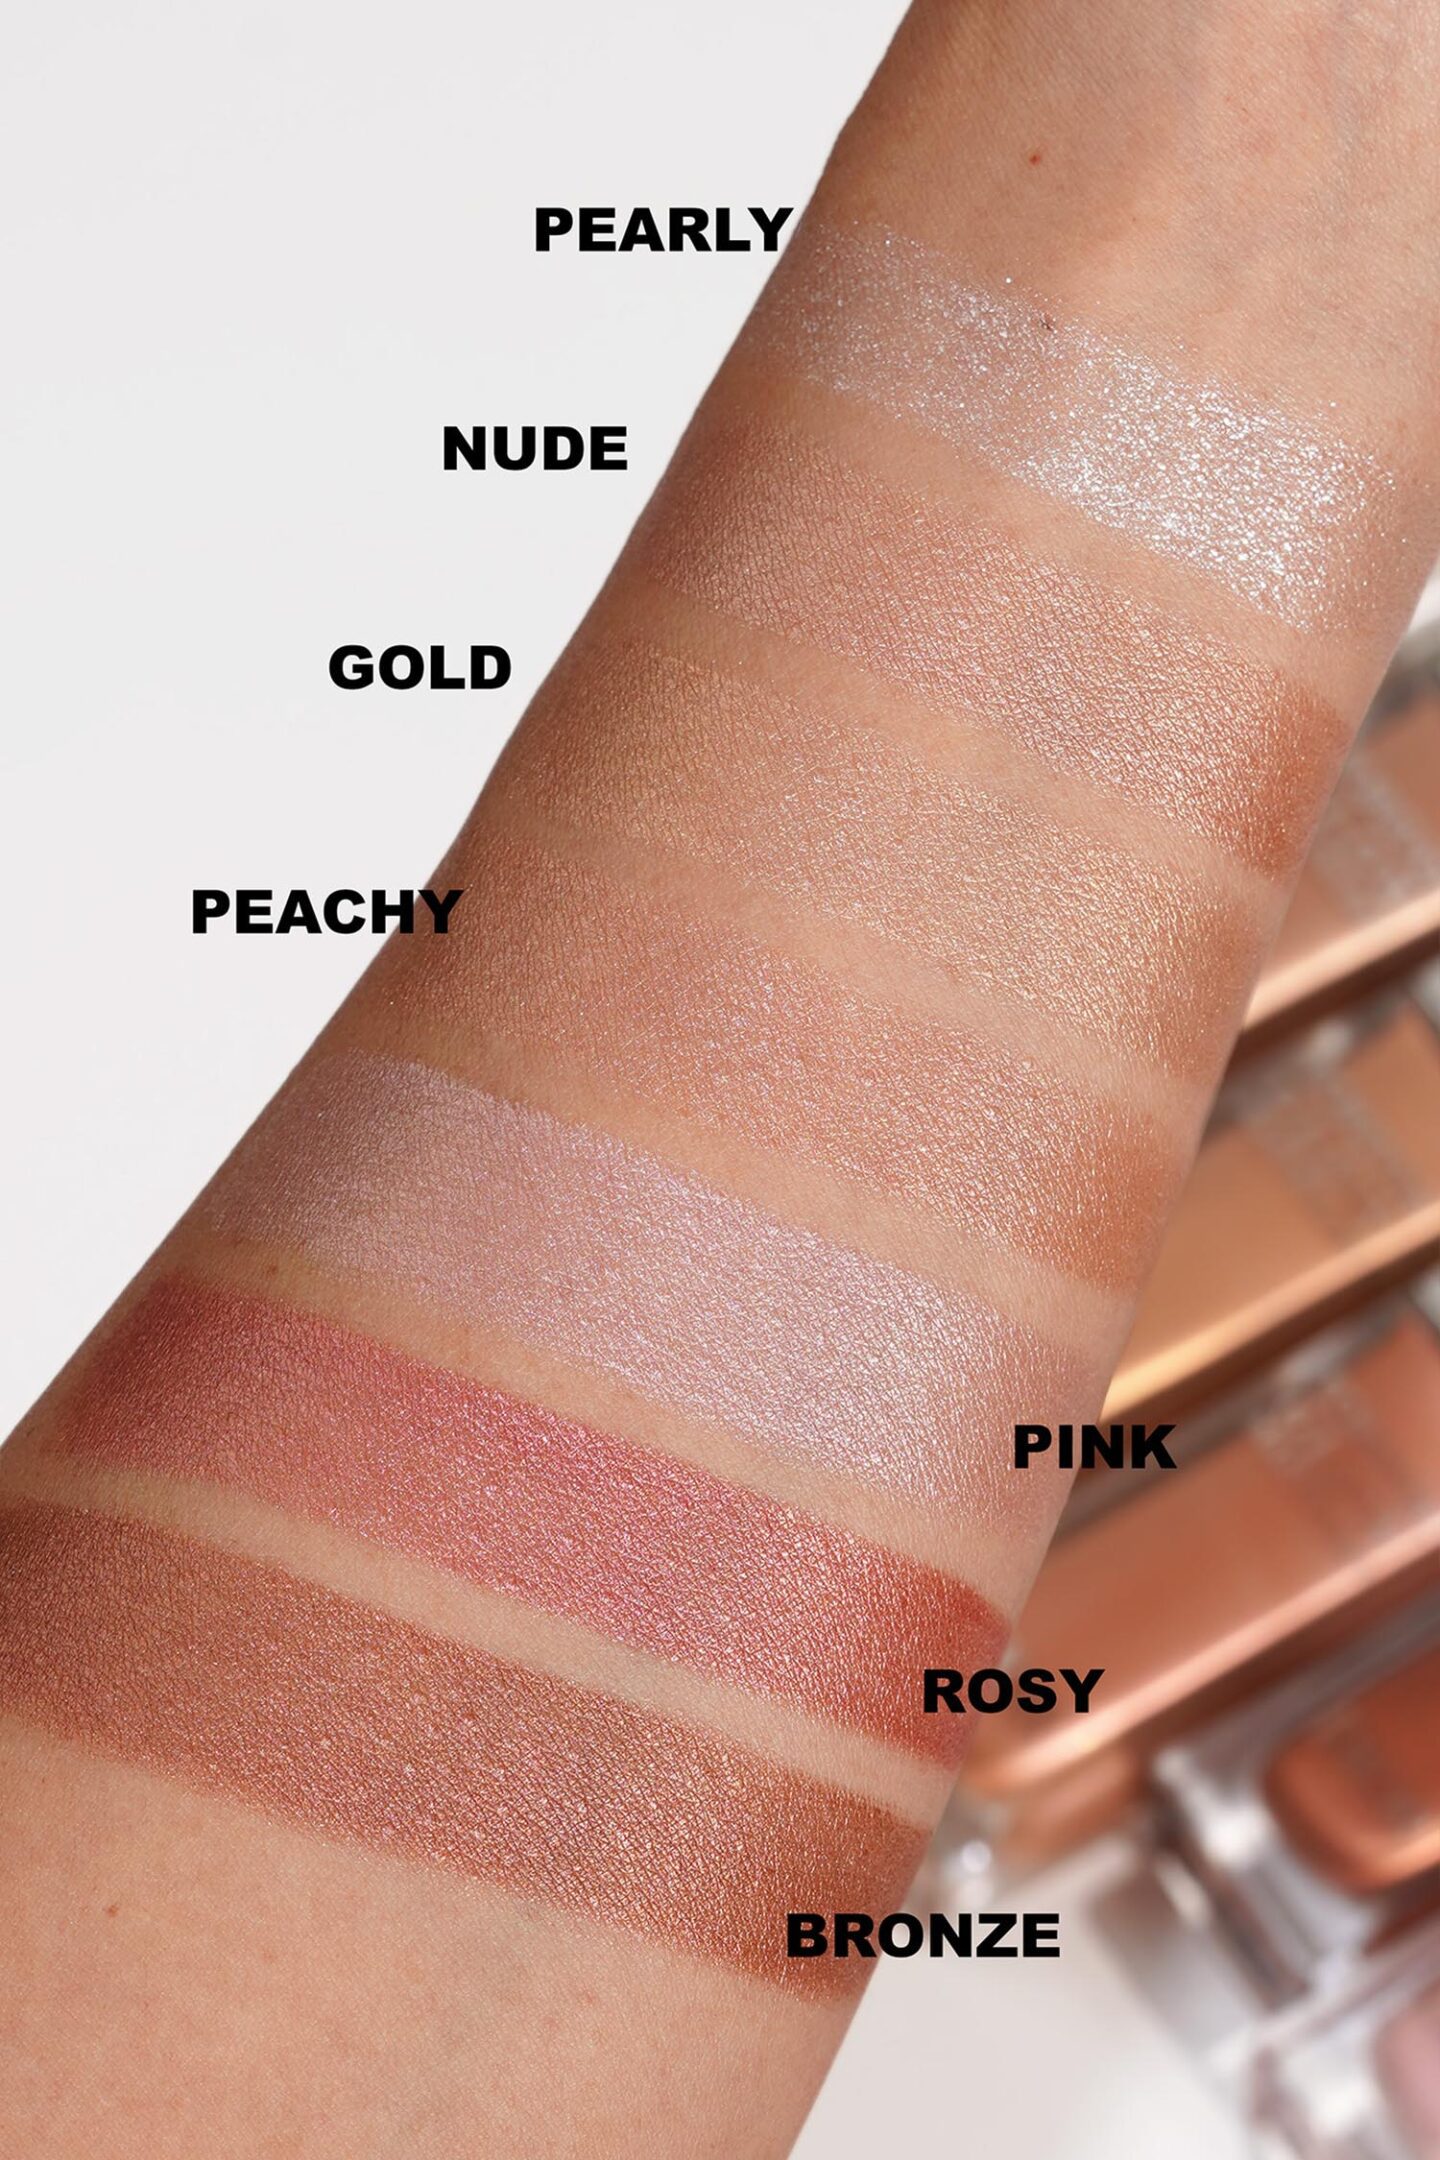 Dior Forever Glow Maximizer Longwear Liquid Highlighter swatches